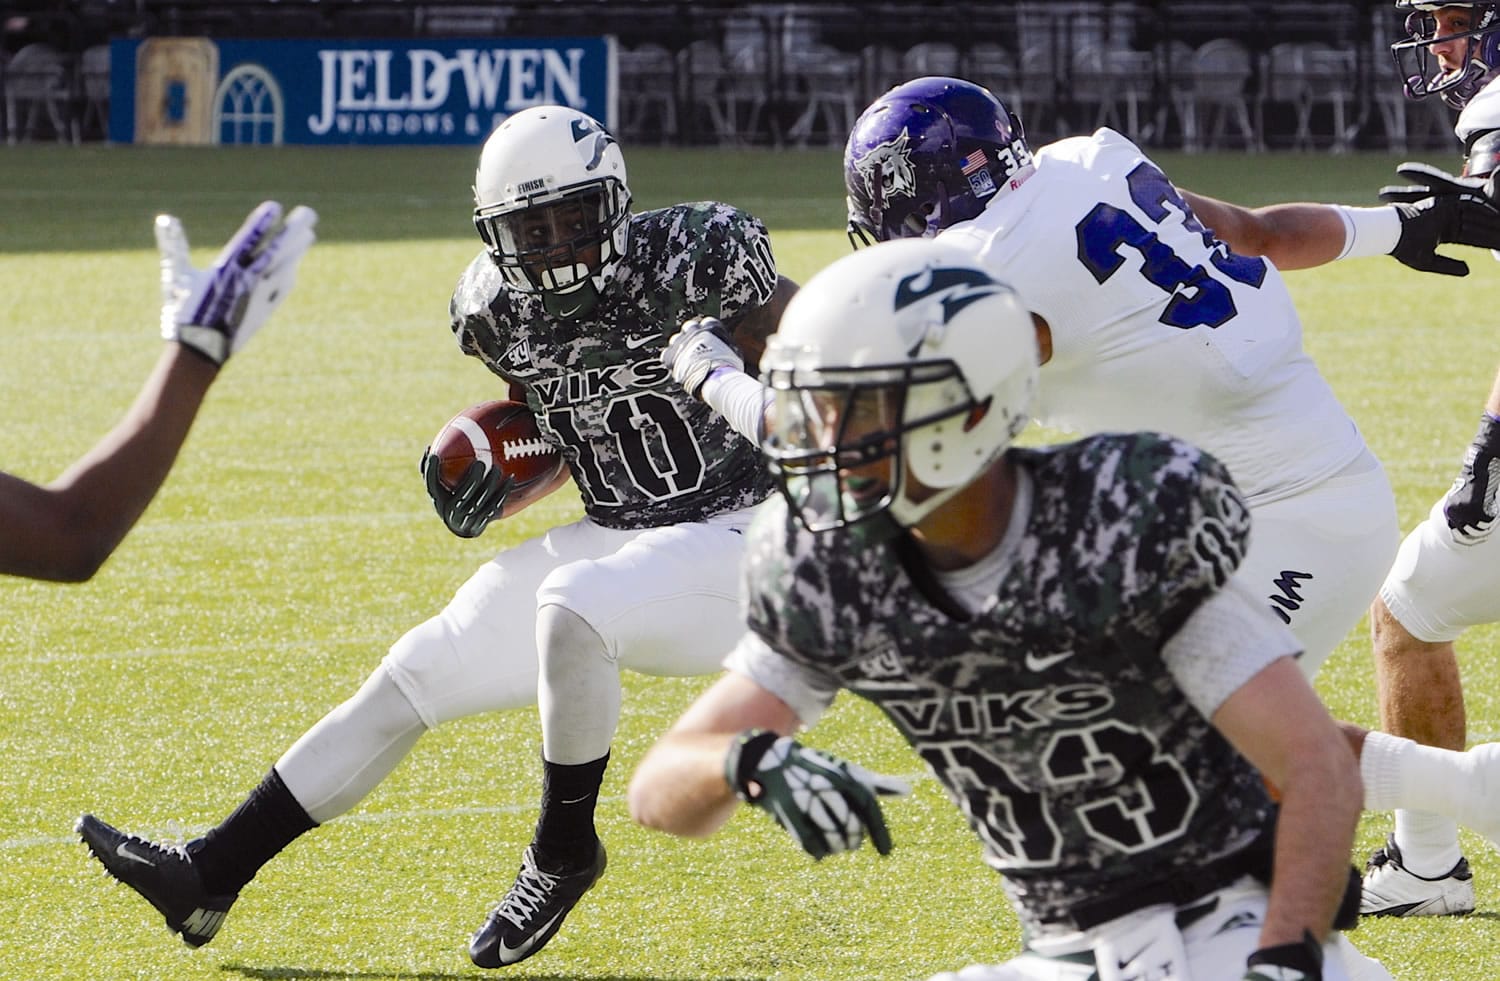 Weber State's Karl Finai (33) defends against Portland State's DJ Adams (10) during the first half of an NCAA college football game in Portland, Ore., Saturday Nov 2, 2013.